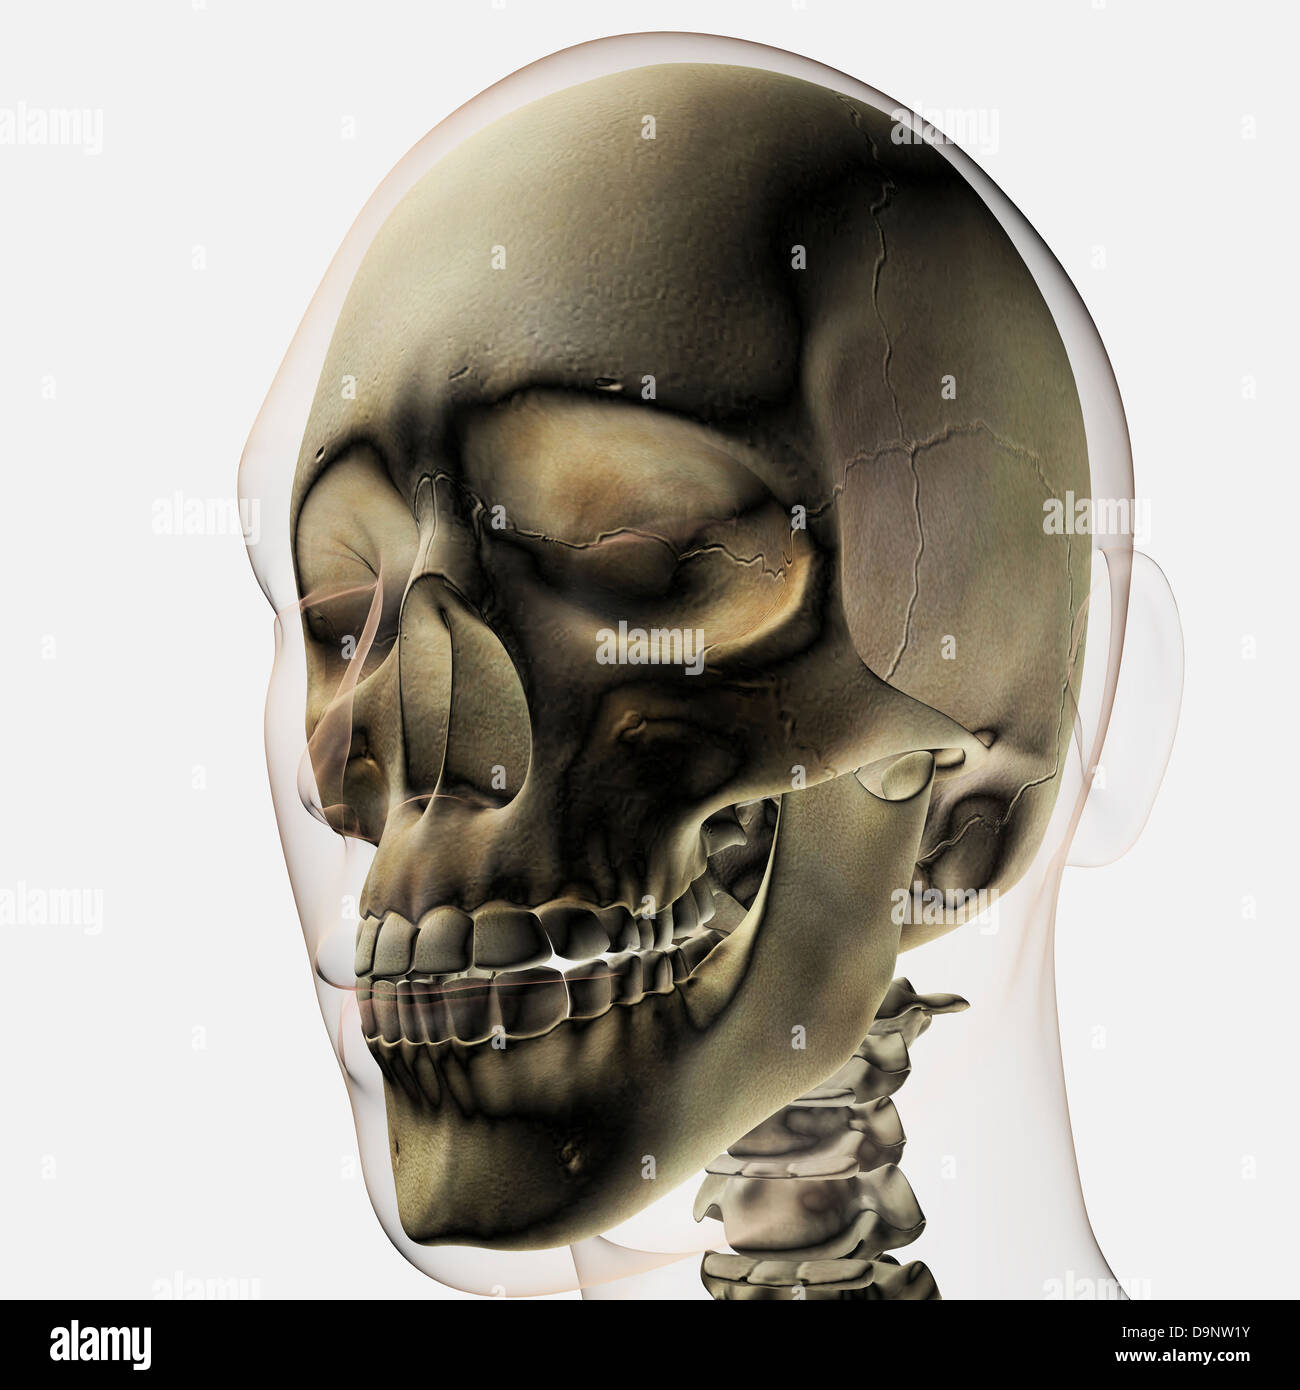 Three dimensional view of human skull and teeth. Stock Photo